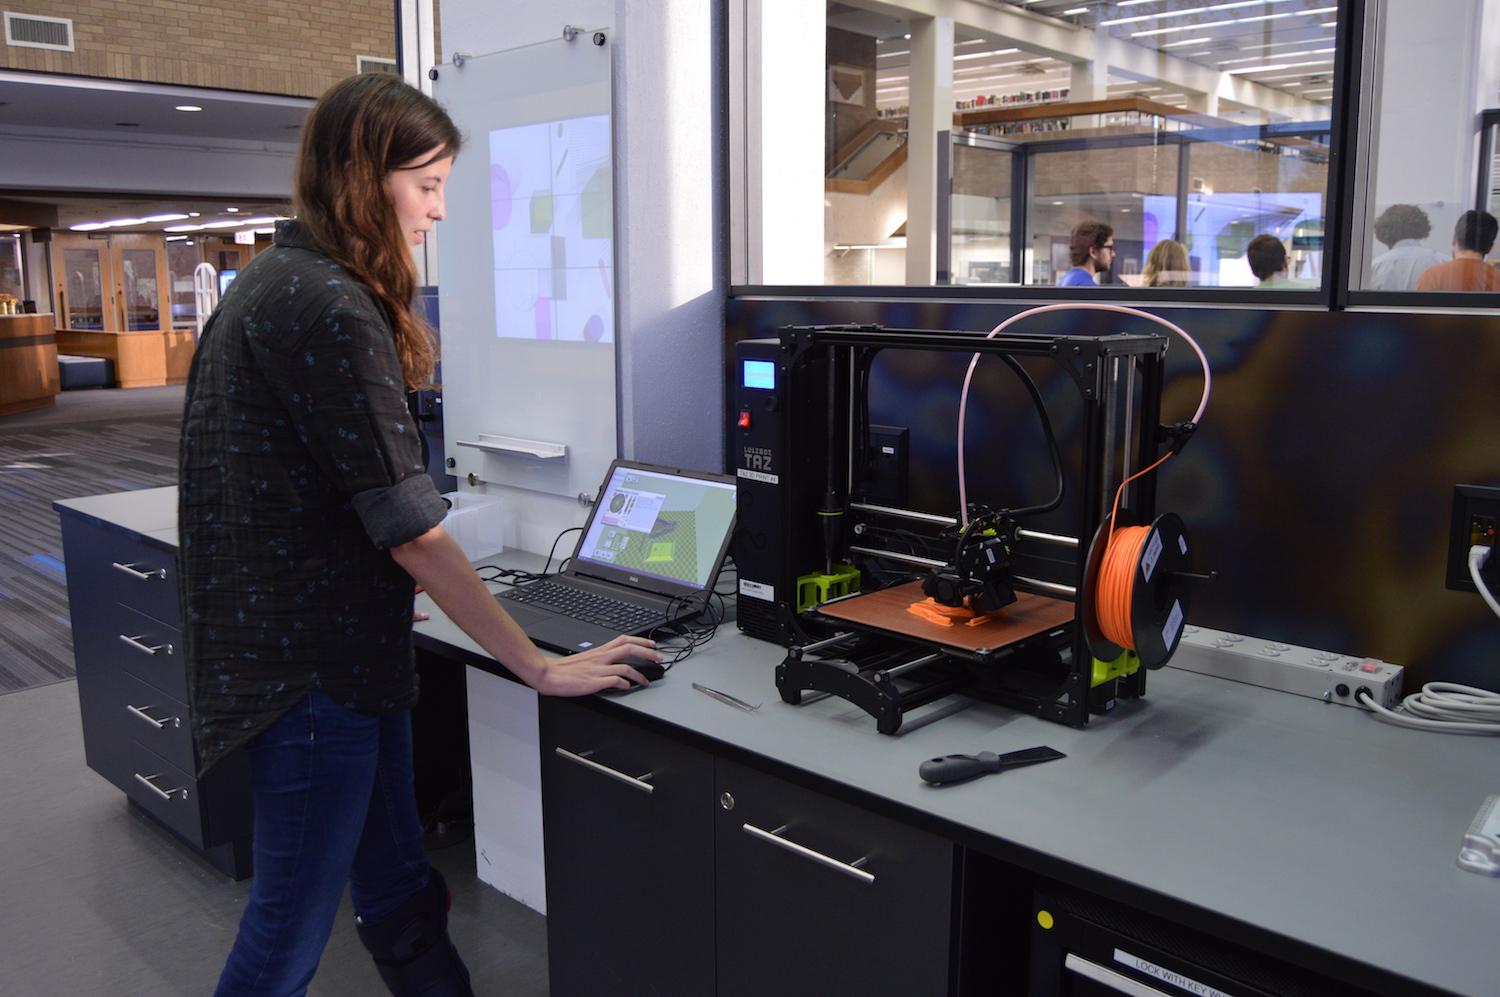 Alison stands at a laptop while she uses a 3D printer